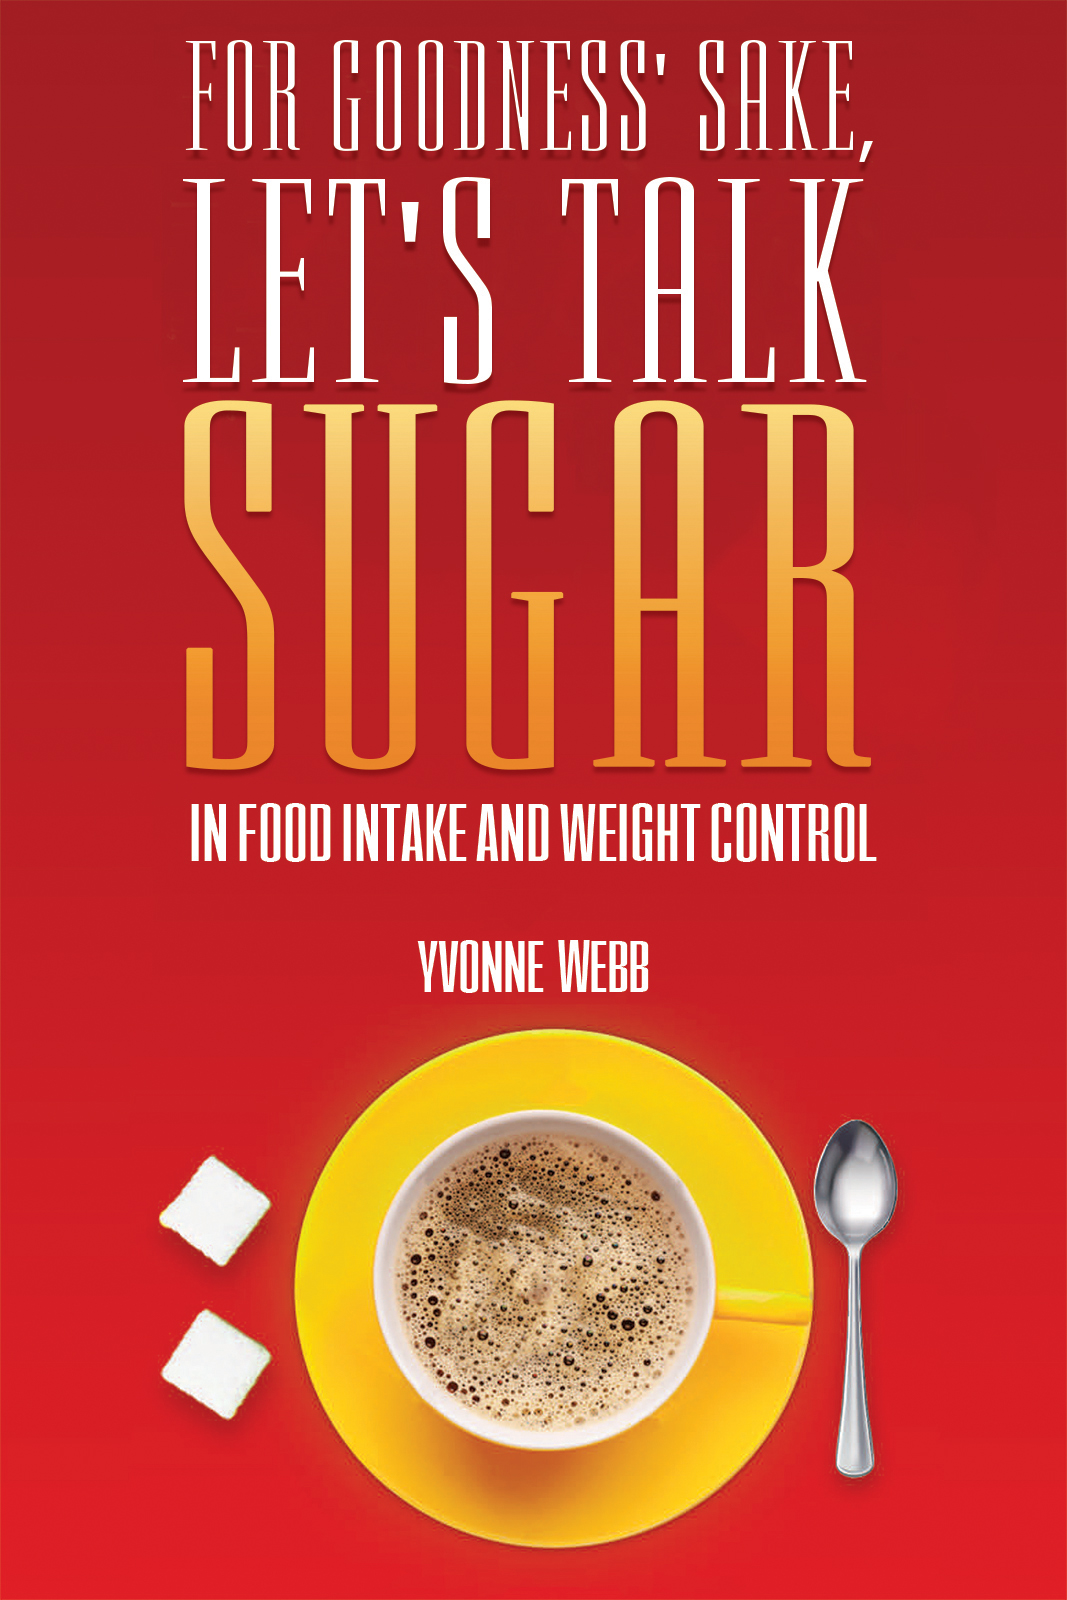 This image is the cover for the book For Goodness' Sake, Let's Talk Sugar